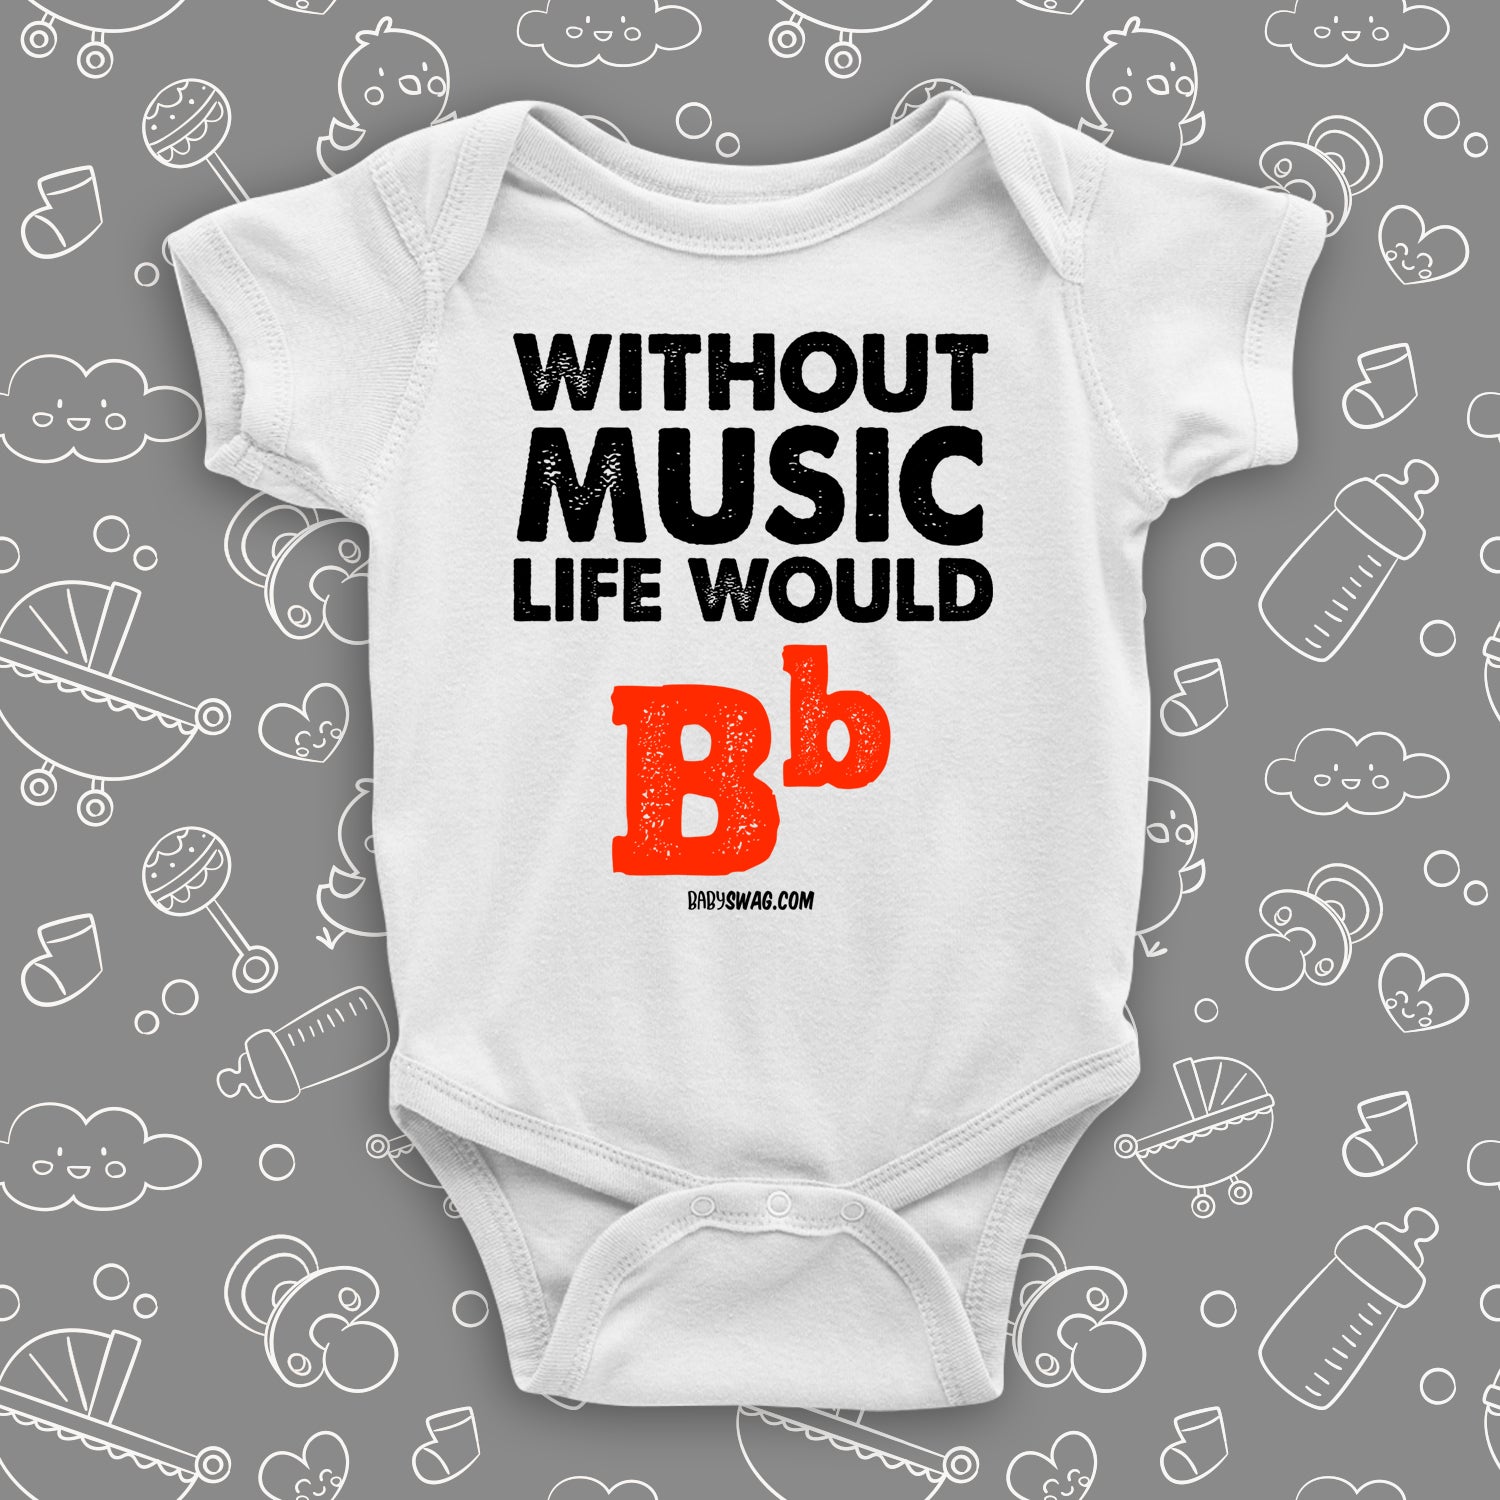 Cute baby onesies with saying "Without Music, Life Would Be Flat" in white.